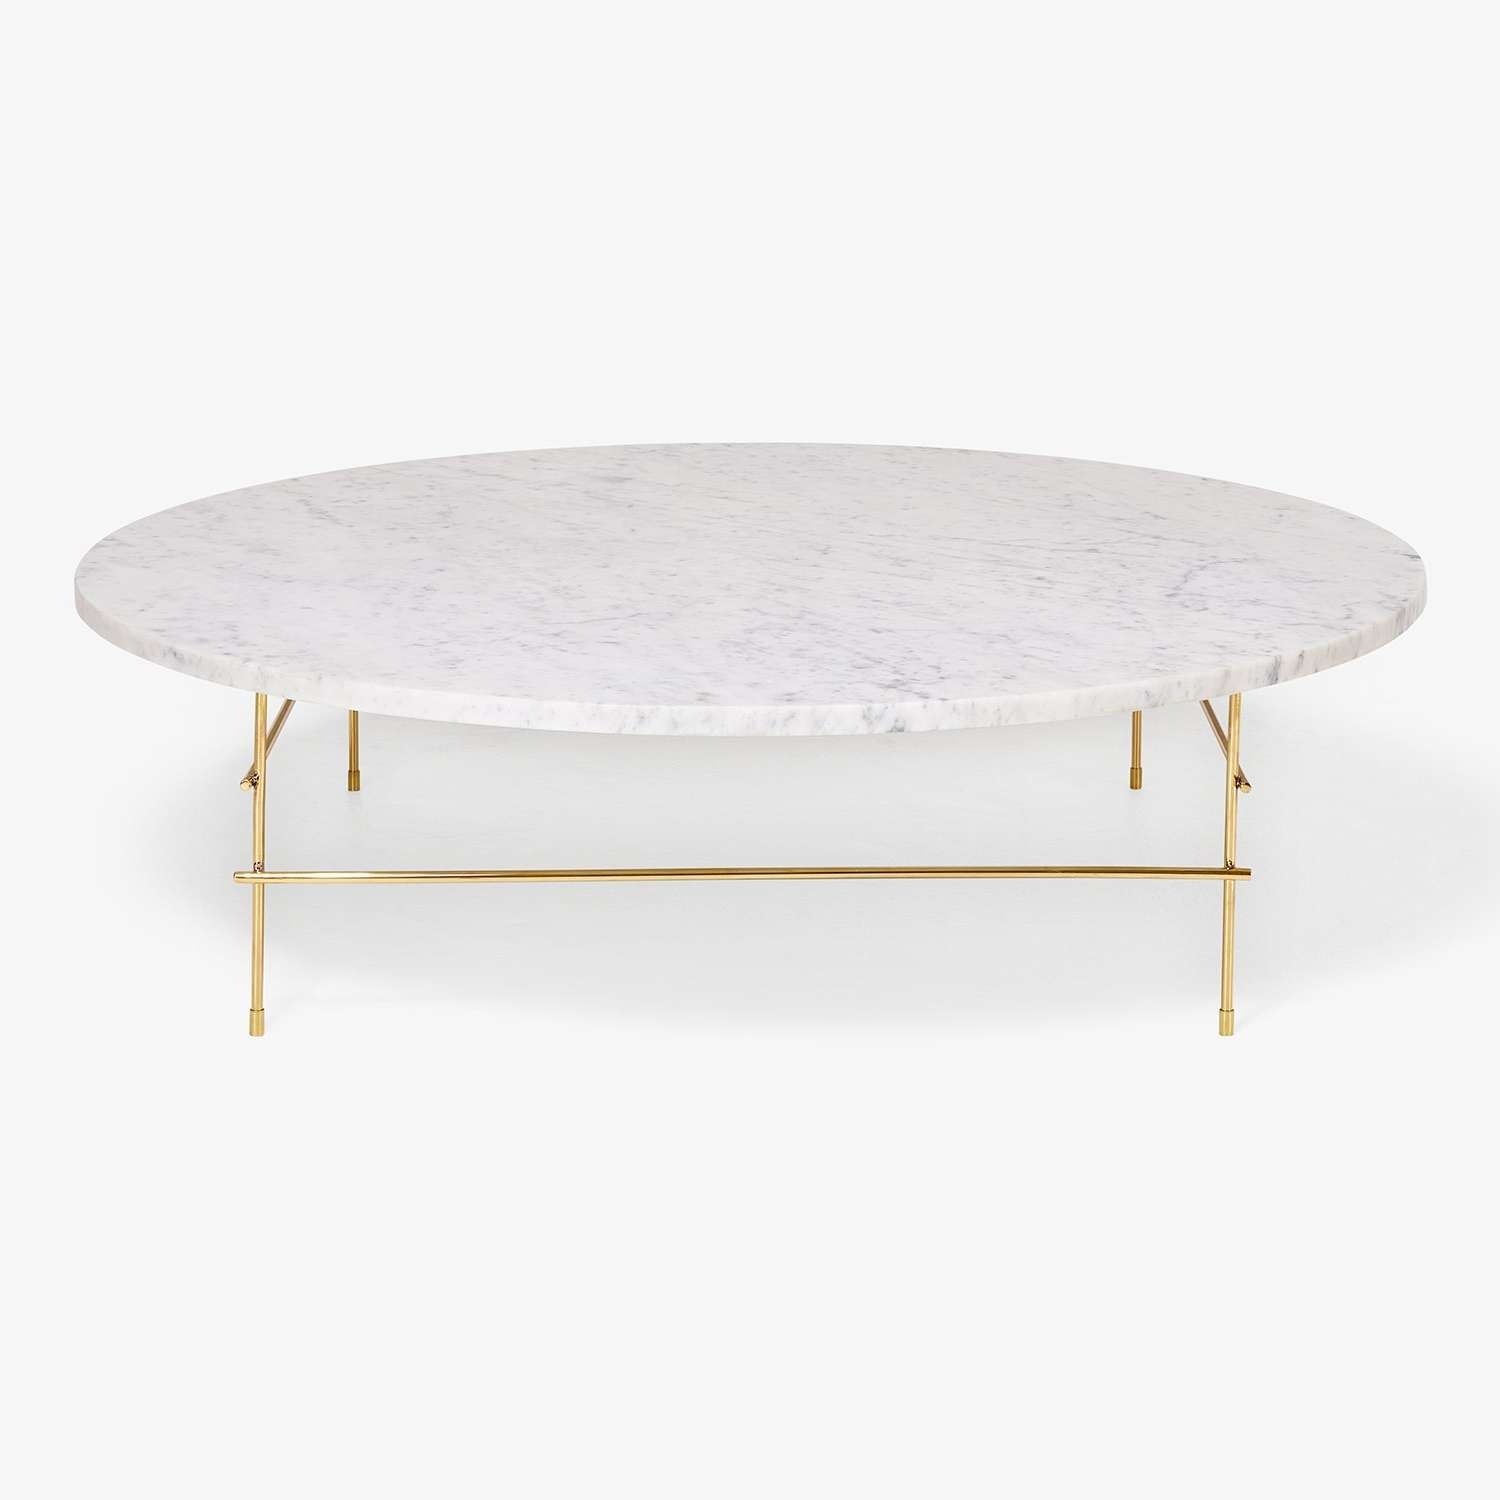 Coffee Tables : Oval White Coffee Table Round Tables Marble For Famous White Oval Coffee Tables (View 4 of 20)